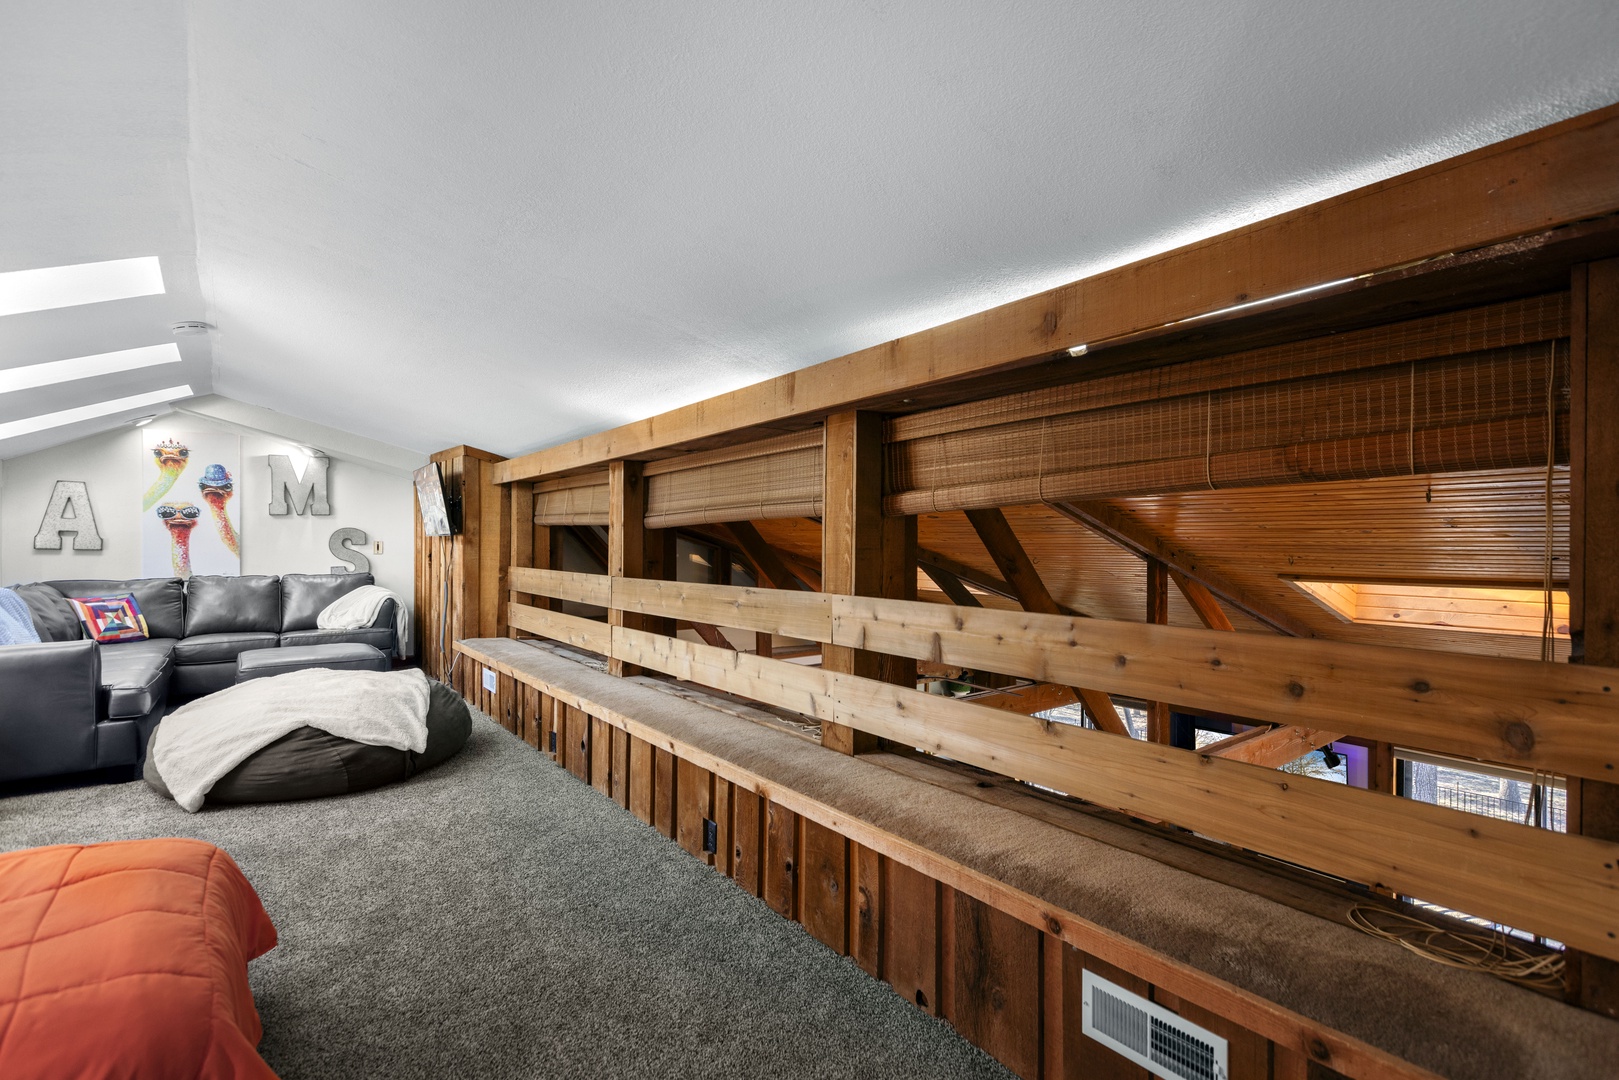 The loft features a pair of twin beds, cozy tv area, and convenient half bath